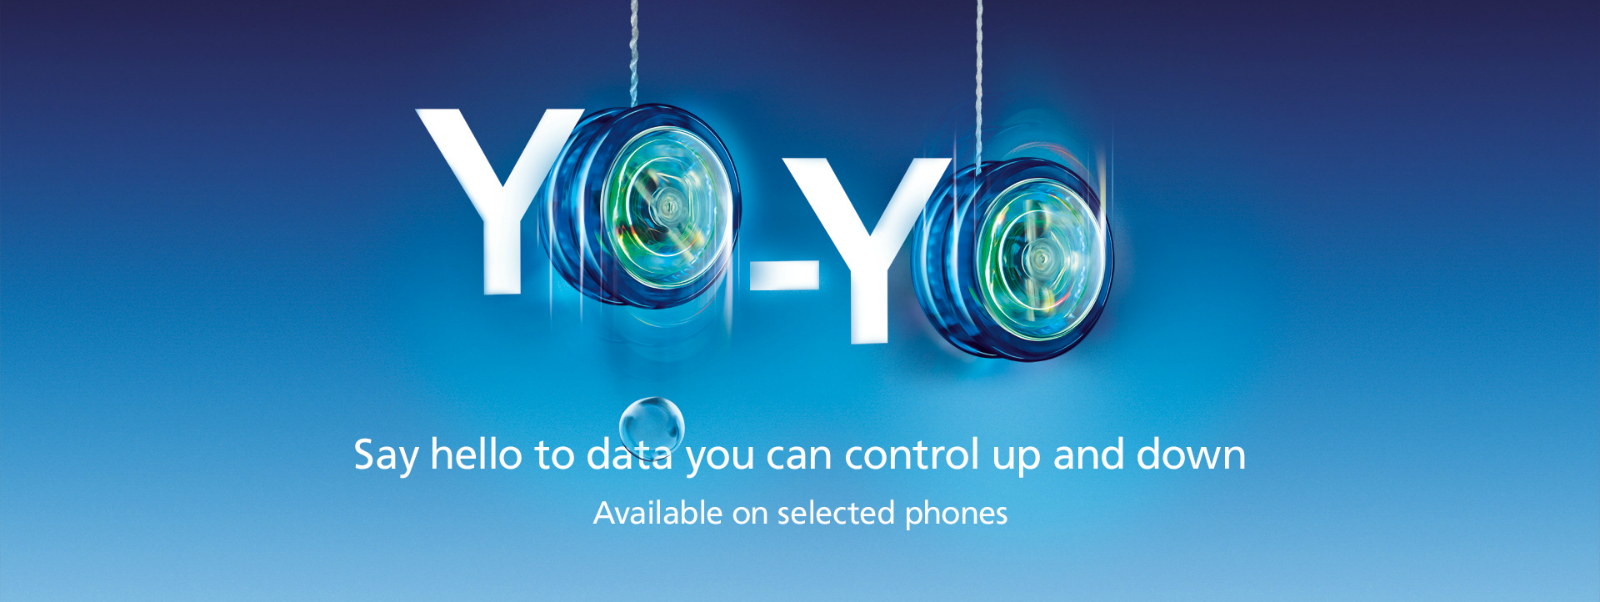 O2 meets the needs of ‘Generation Flex’ with revolutionary tariffs that customers can change every month